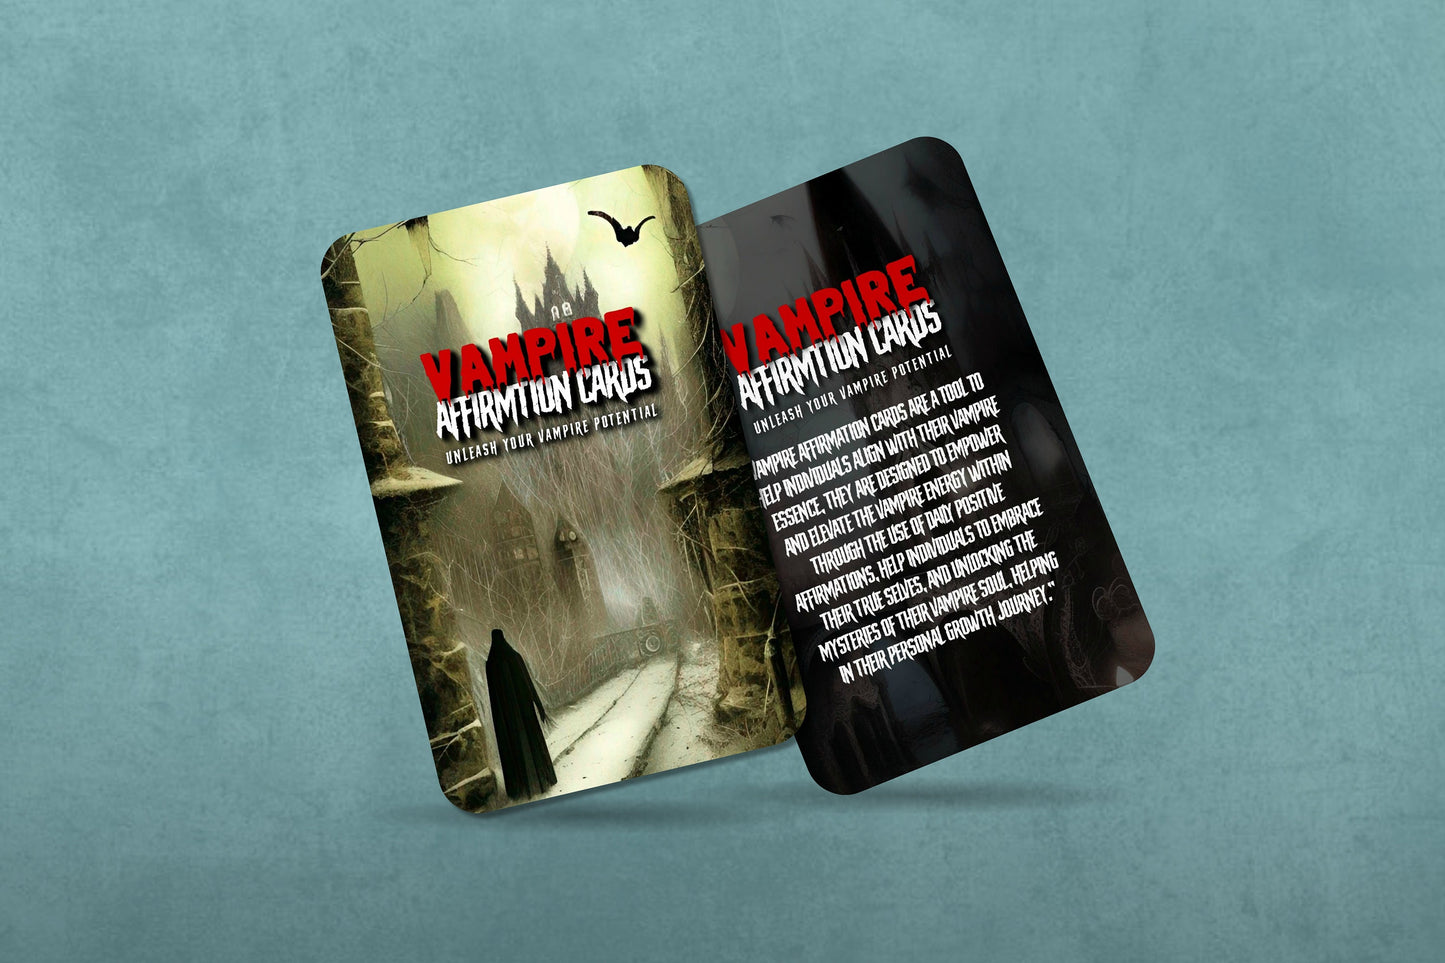 Vampire Affirmation Cards - Unlease your Vampire potential